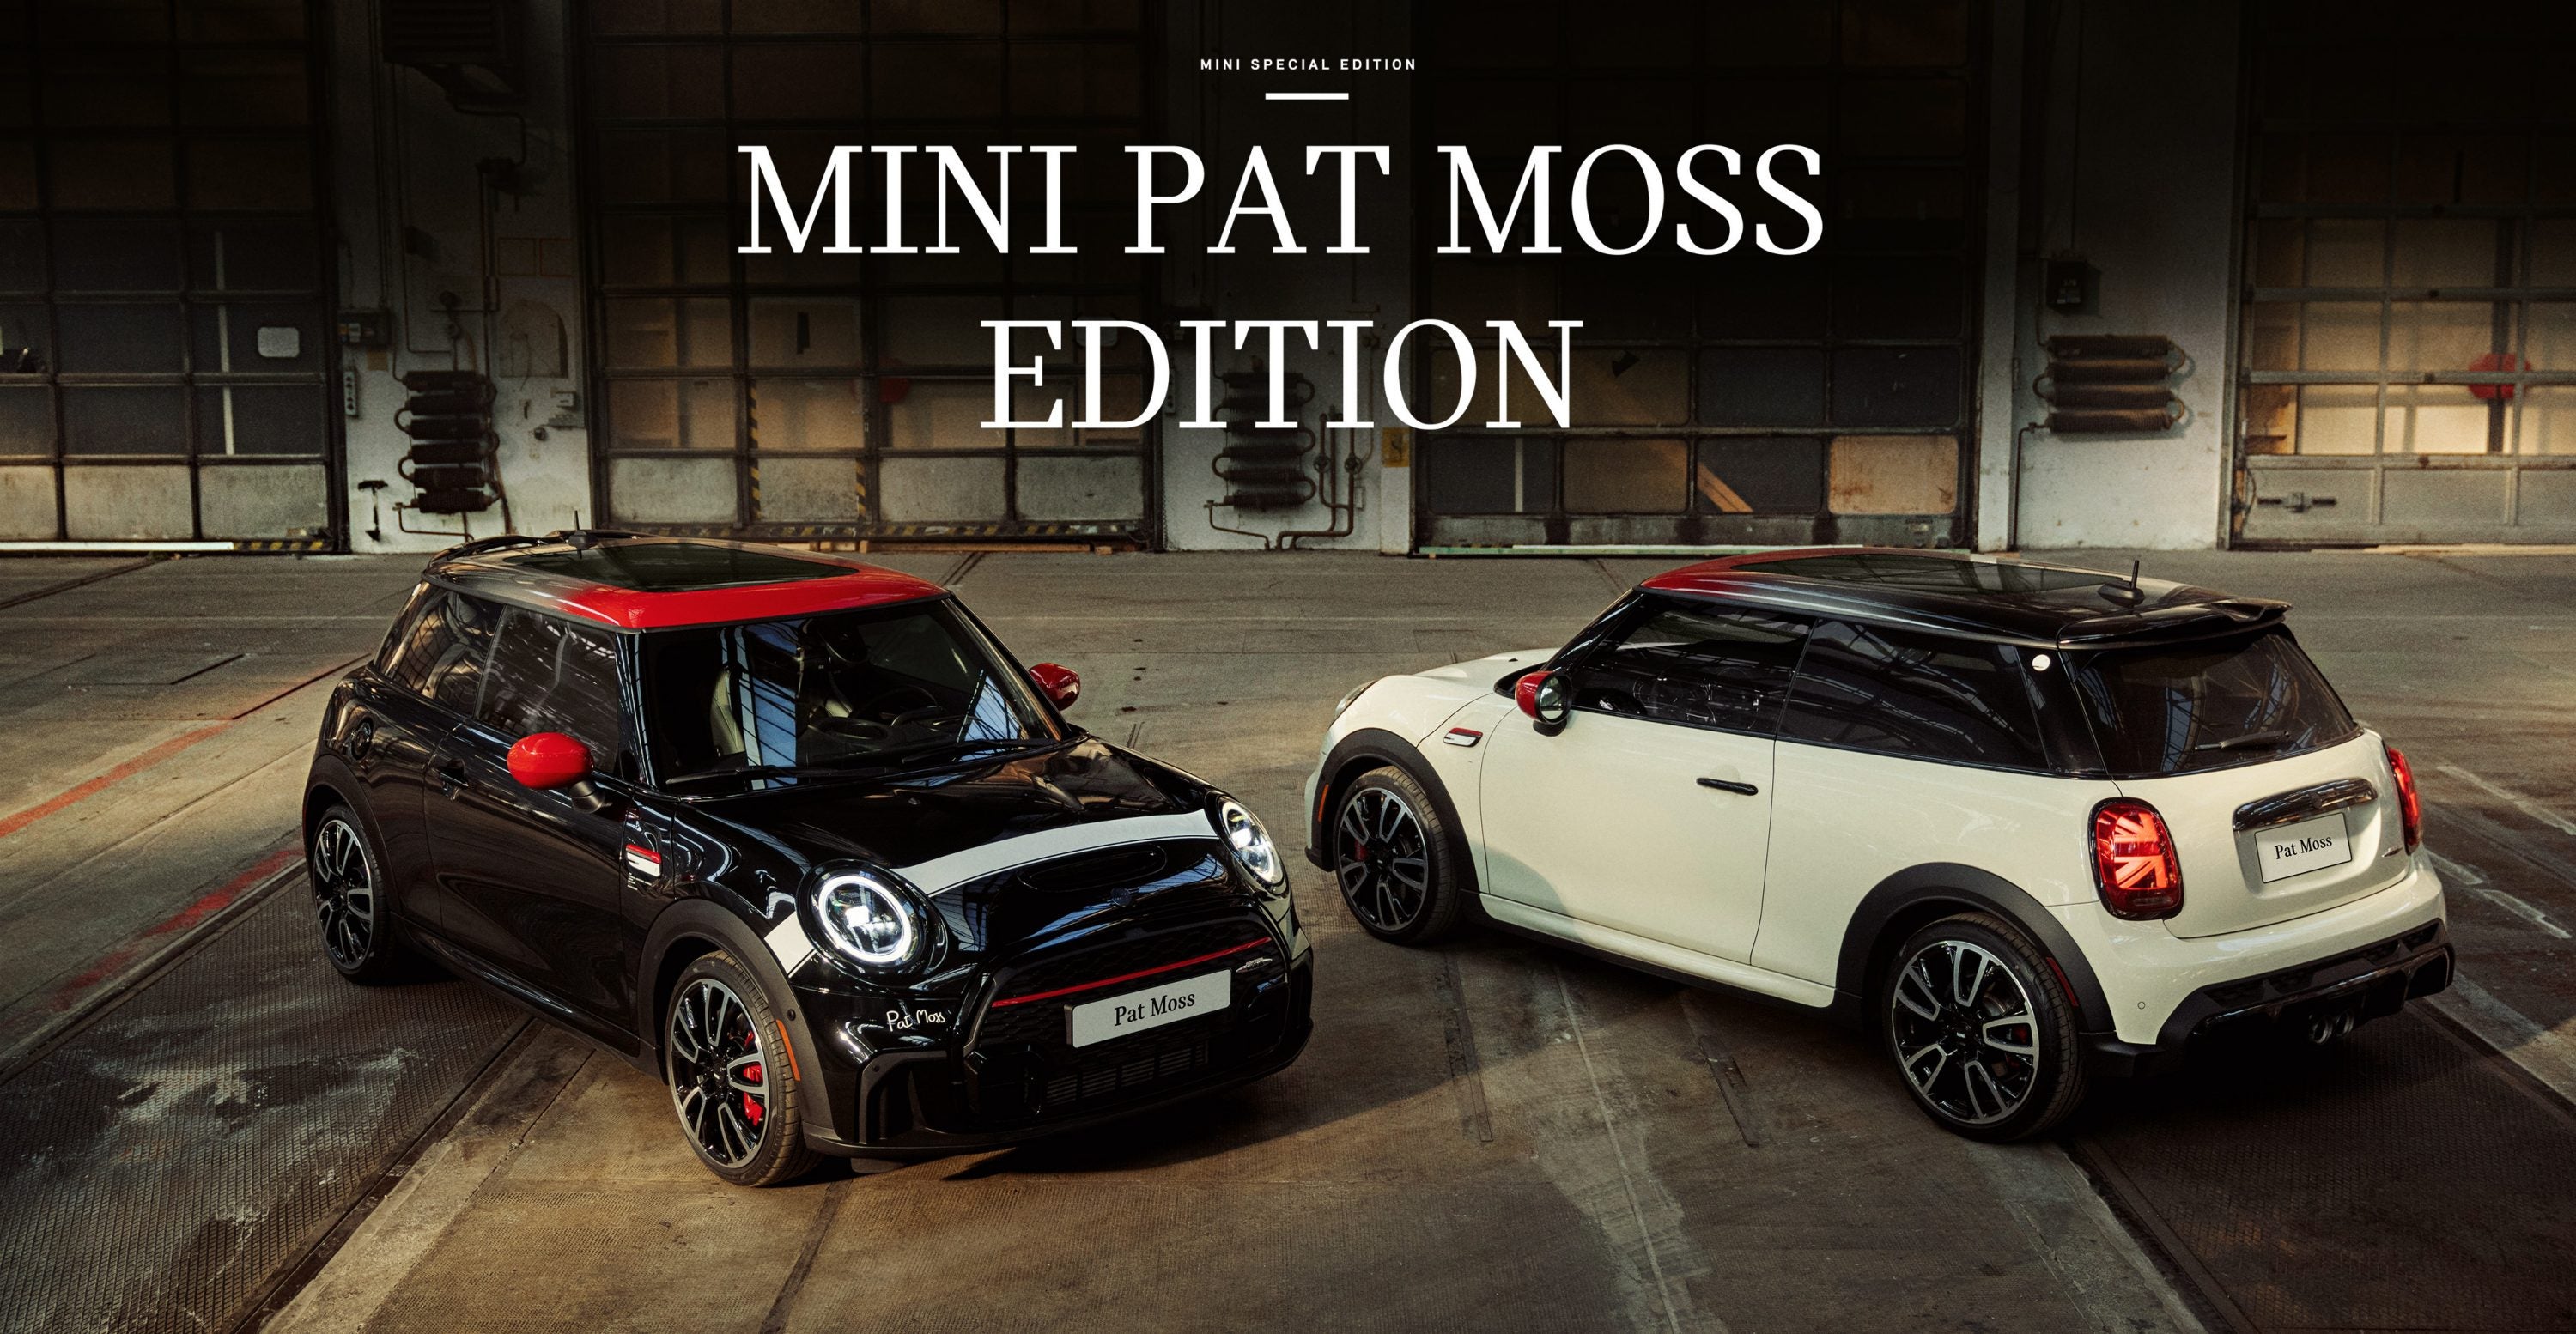 MINI Pat Moss Edition vehicles side by side, the left one (Midnight Black metallic) in a three-quarter front view and the right one (Pepper White) in a three-quarter back view, parked on a cement surface in a warehouse type space